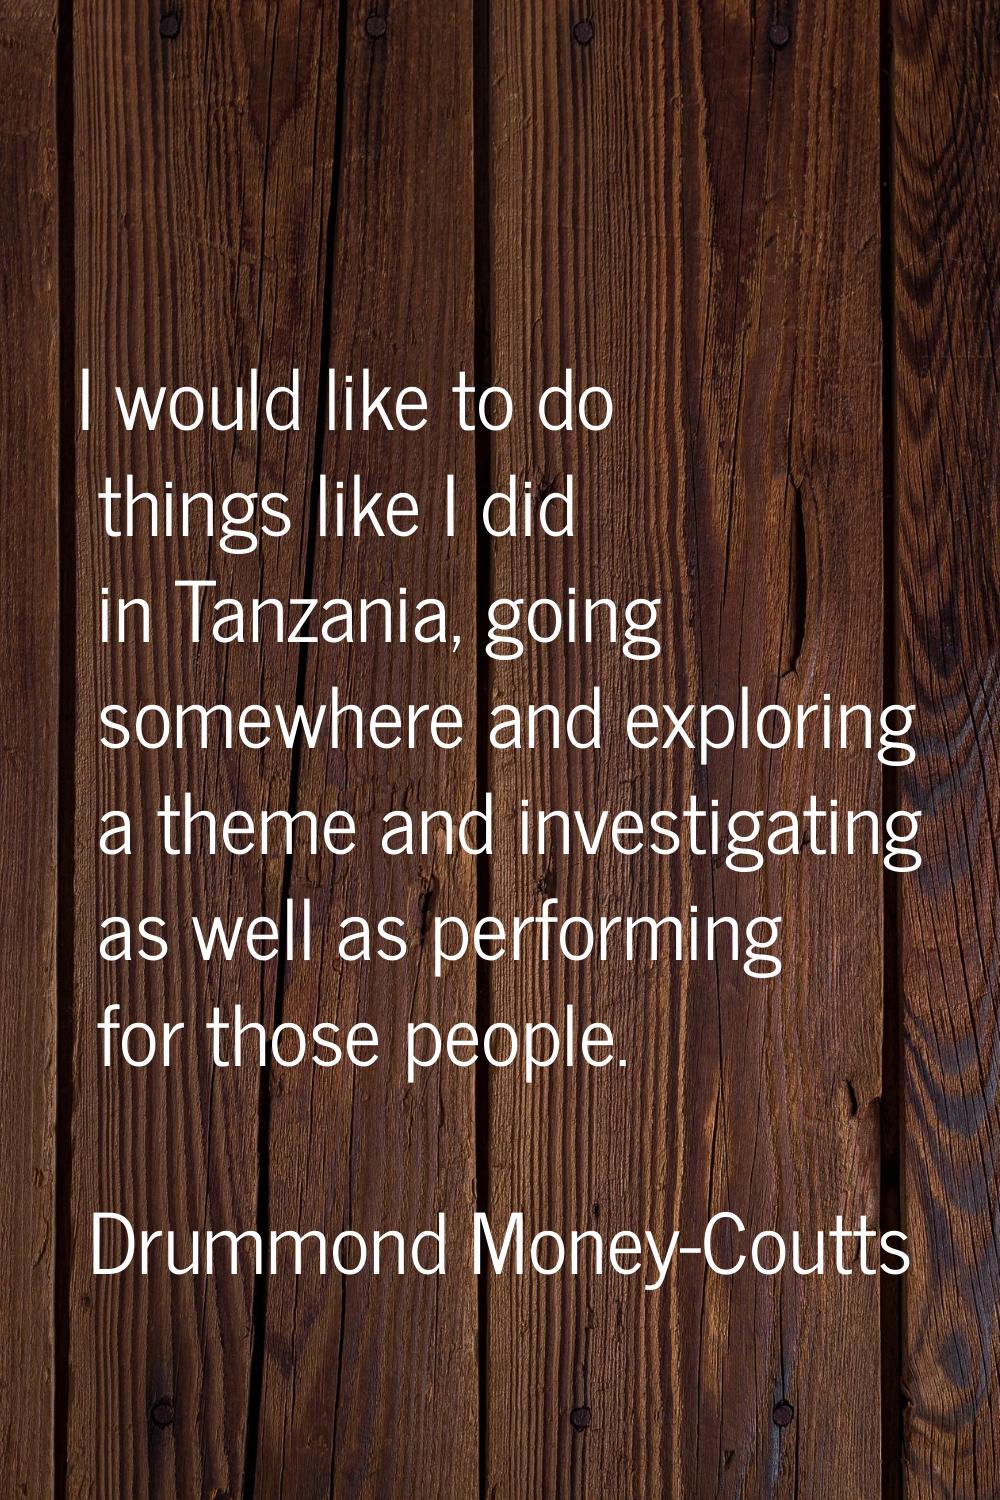 I would like to do things like I did in Tanzania, going somewhere and exploring a theme and investi